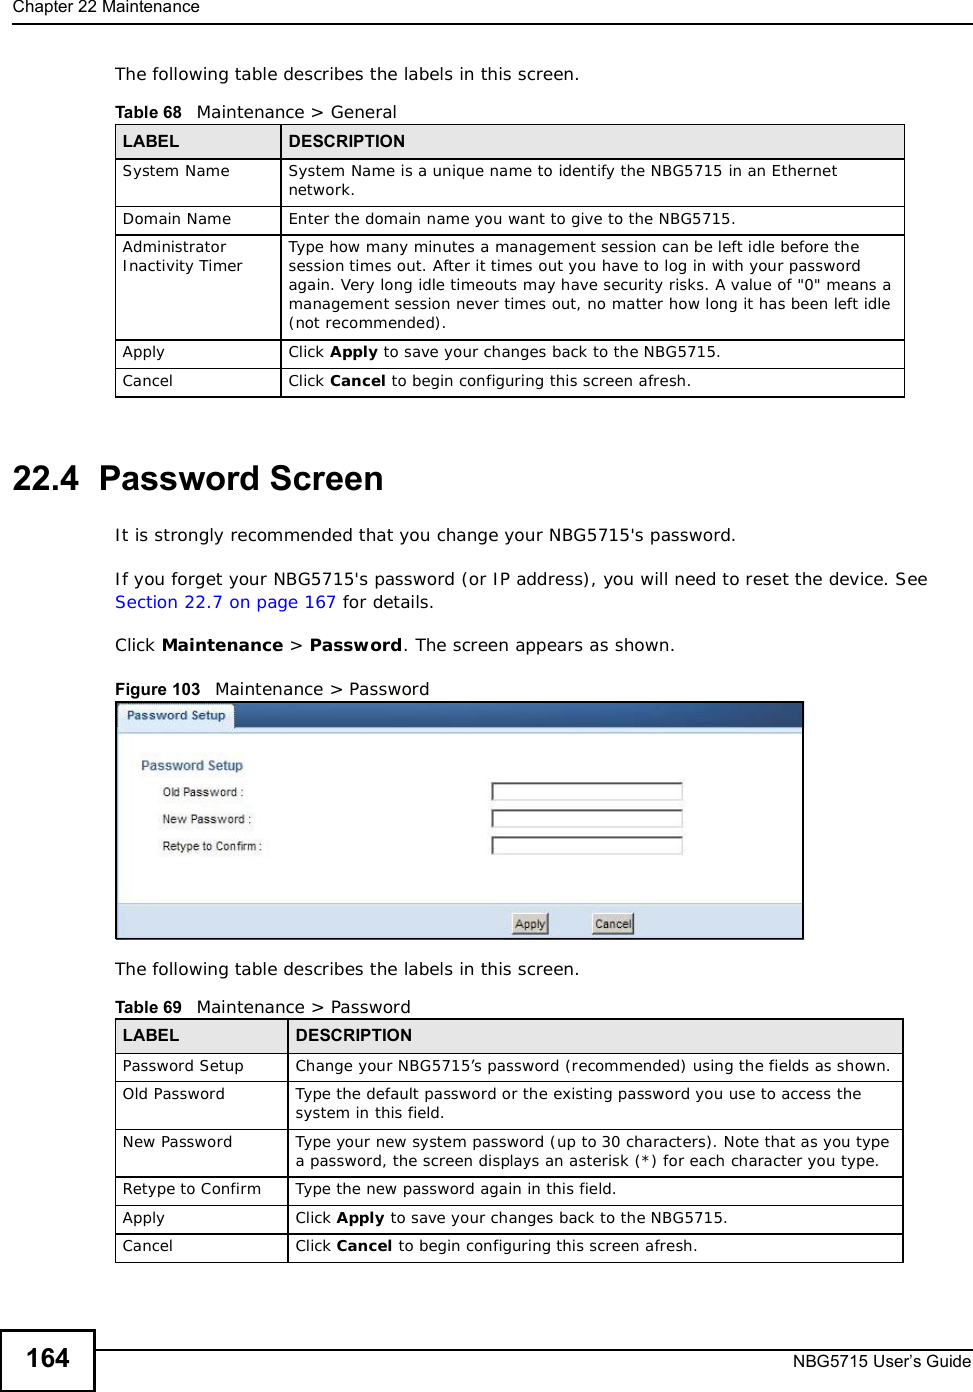 Chapter 22MaintenanceNBG5715 User’s Guide164The following table describes the labels in this screen.22.4  Password ScreenIt is strongly recommended that you change your NBG5715&apos;s password. If you forget your NBG5715&apos;s password (or IP address), you will need to reset the device. See Section 22.7 on page 167 for details.Click Maintenance &gt; Password. The screen appears as shown.Figure 103   Maintenance &gt; Password The following table describes the labels in this screen.Table 68   Maintenance &gt; GeneralLABEL DESCRIPTIONSystem Name System Name is a unique name to identify the NBG5715 in an Ethernet network.Domain Name Enter the domain name you want to give to the NBG5715.Administrator Inactivity Timer Type how many minutes a management session can be left idle before the session times out. After it times out you have to log in with your password again. Very long idle timeouts may have security risks. A value of &quot;0&quot; means a management session never times out, no matter how long it has been left idle (not recommended).Apply Click Apply to save your changes back to the NBG5715.Cancel Click Cancel to begin configuring this screen afresh.Table 69   Maintenance &gt; PasswordLABEL DESCRIPTIONPassword Setup Change your NBG5715’s password (recommended) using the fields as shown.Old Password Type the default password or the existing password you use to access the system in this field.New Password Type your new system password (up to 30 characters). Note that as you type a password, the screen displays an asterisk (*) for each character you type.Retype to Confirm Type the new password again in this field.Apply Click Apply to save your changes back to the NBG5715.Cancel Click Cancel to begin configuring this screen afresh.